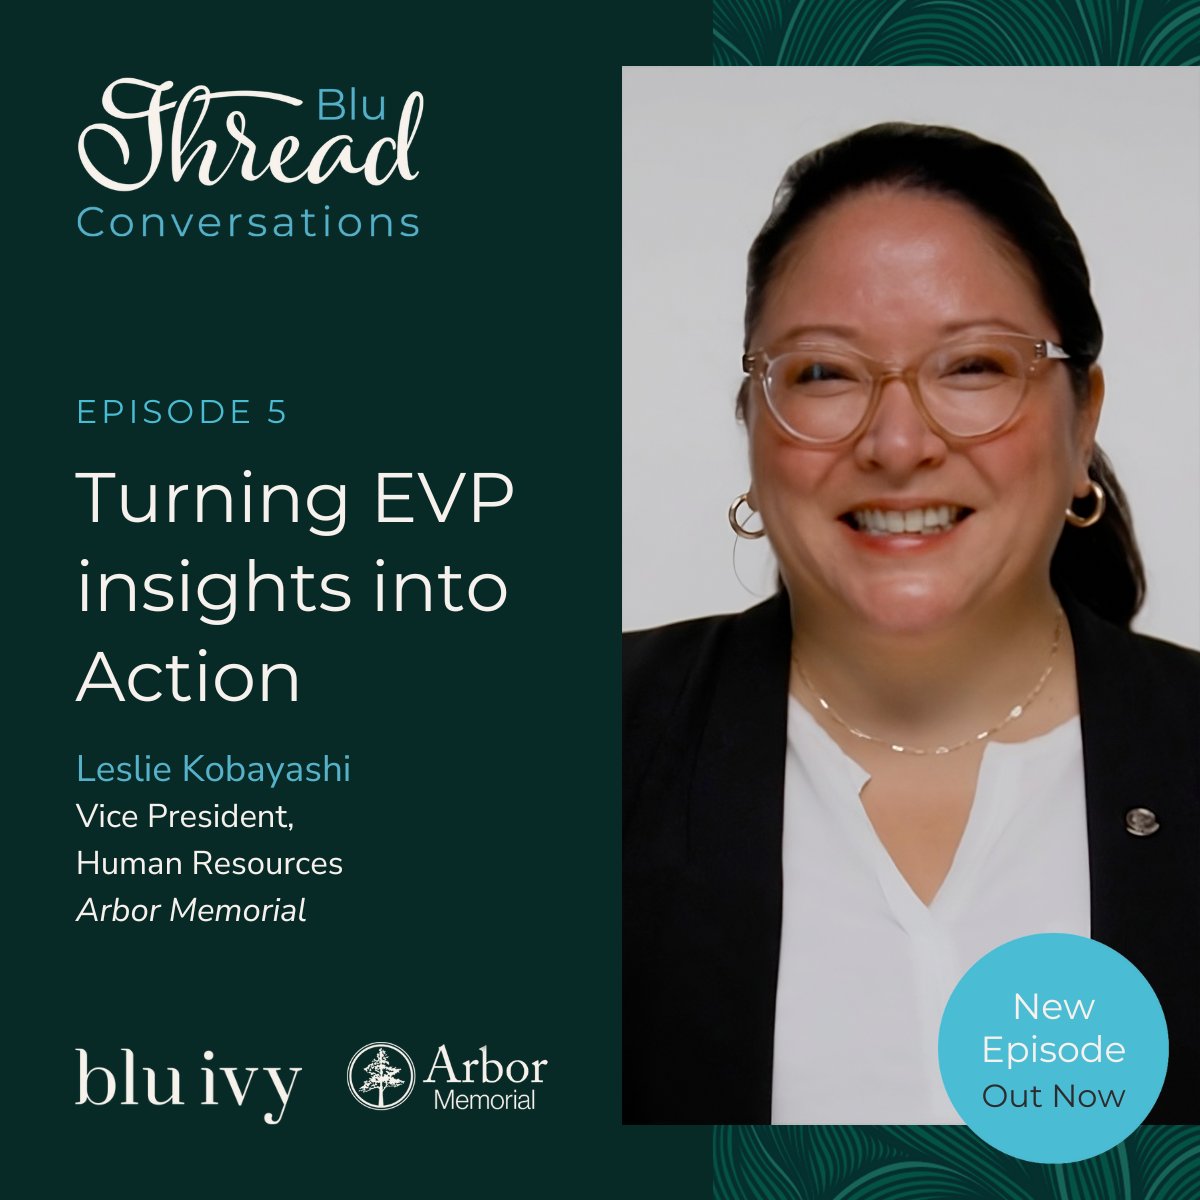 How do you turn EVP insights into Action and Engagement within your organization?

S01E05 OUT NOW - Turning EVP insights into Action with Arbor Memorial 

Podcast link - link.chtbl.com/ArborMemorial
 
#ArborMemorial #CHRO #EmployerBrand #EVP #Culture #TopEmployer #EmployeeRecognition